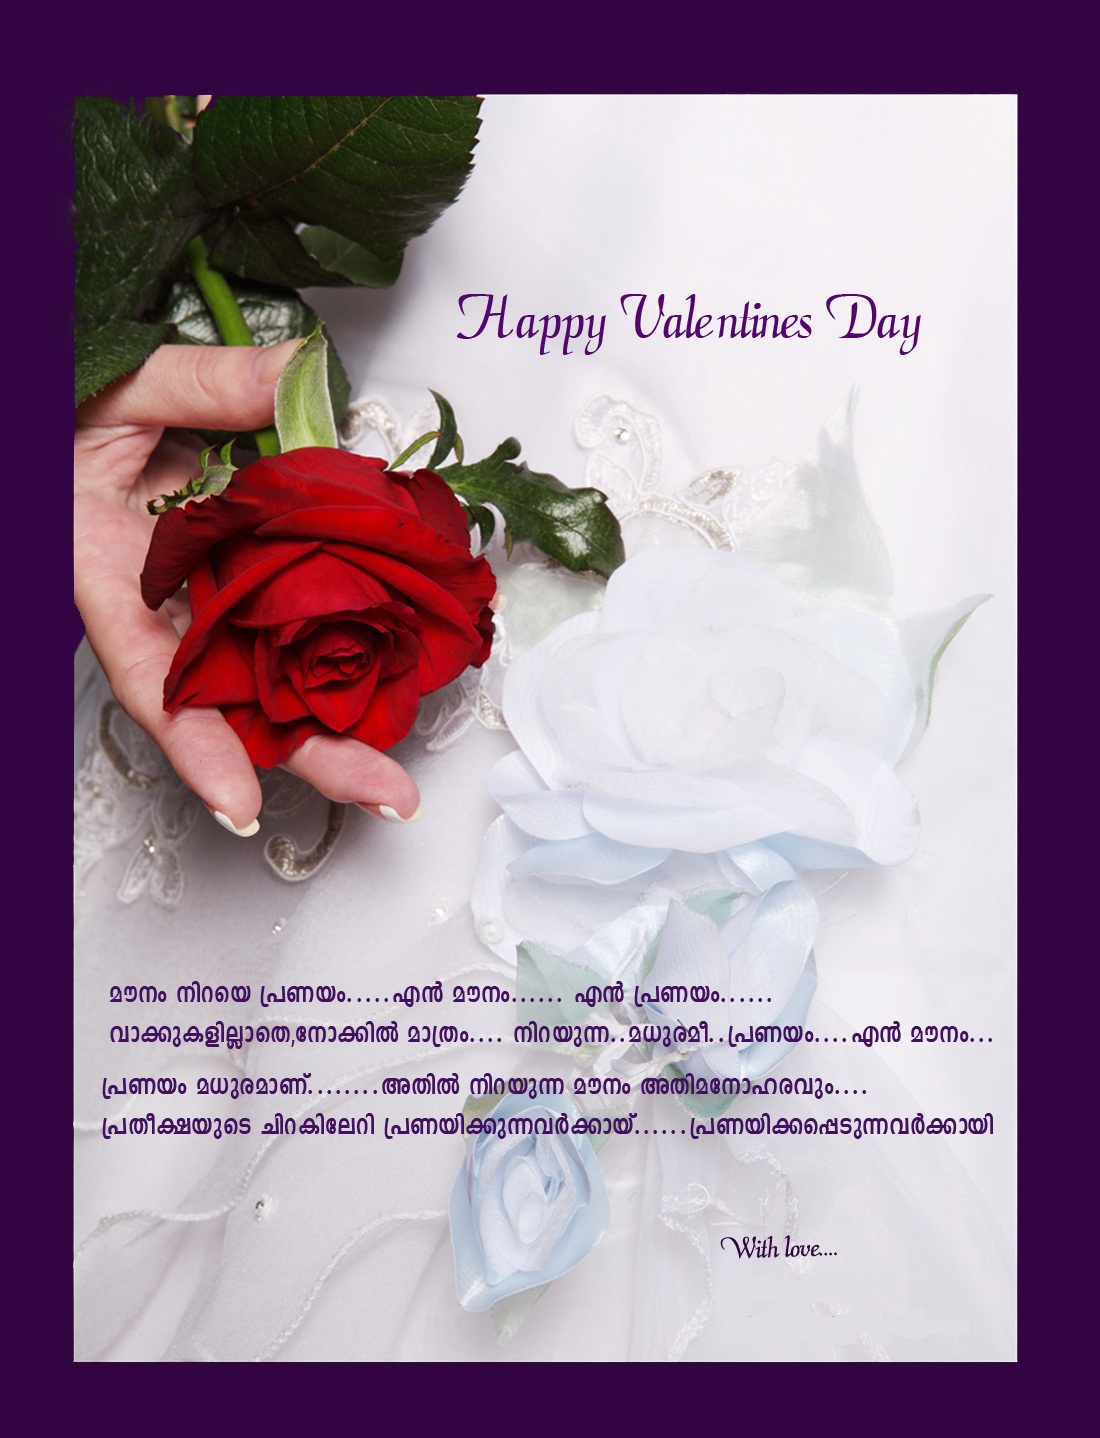 Happy Valentines' Day in advance.....